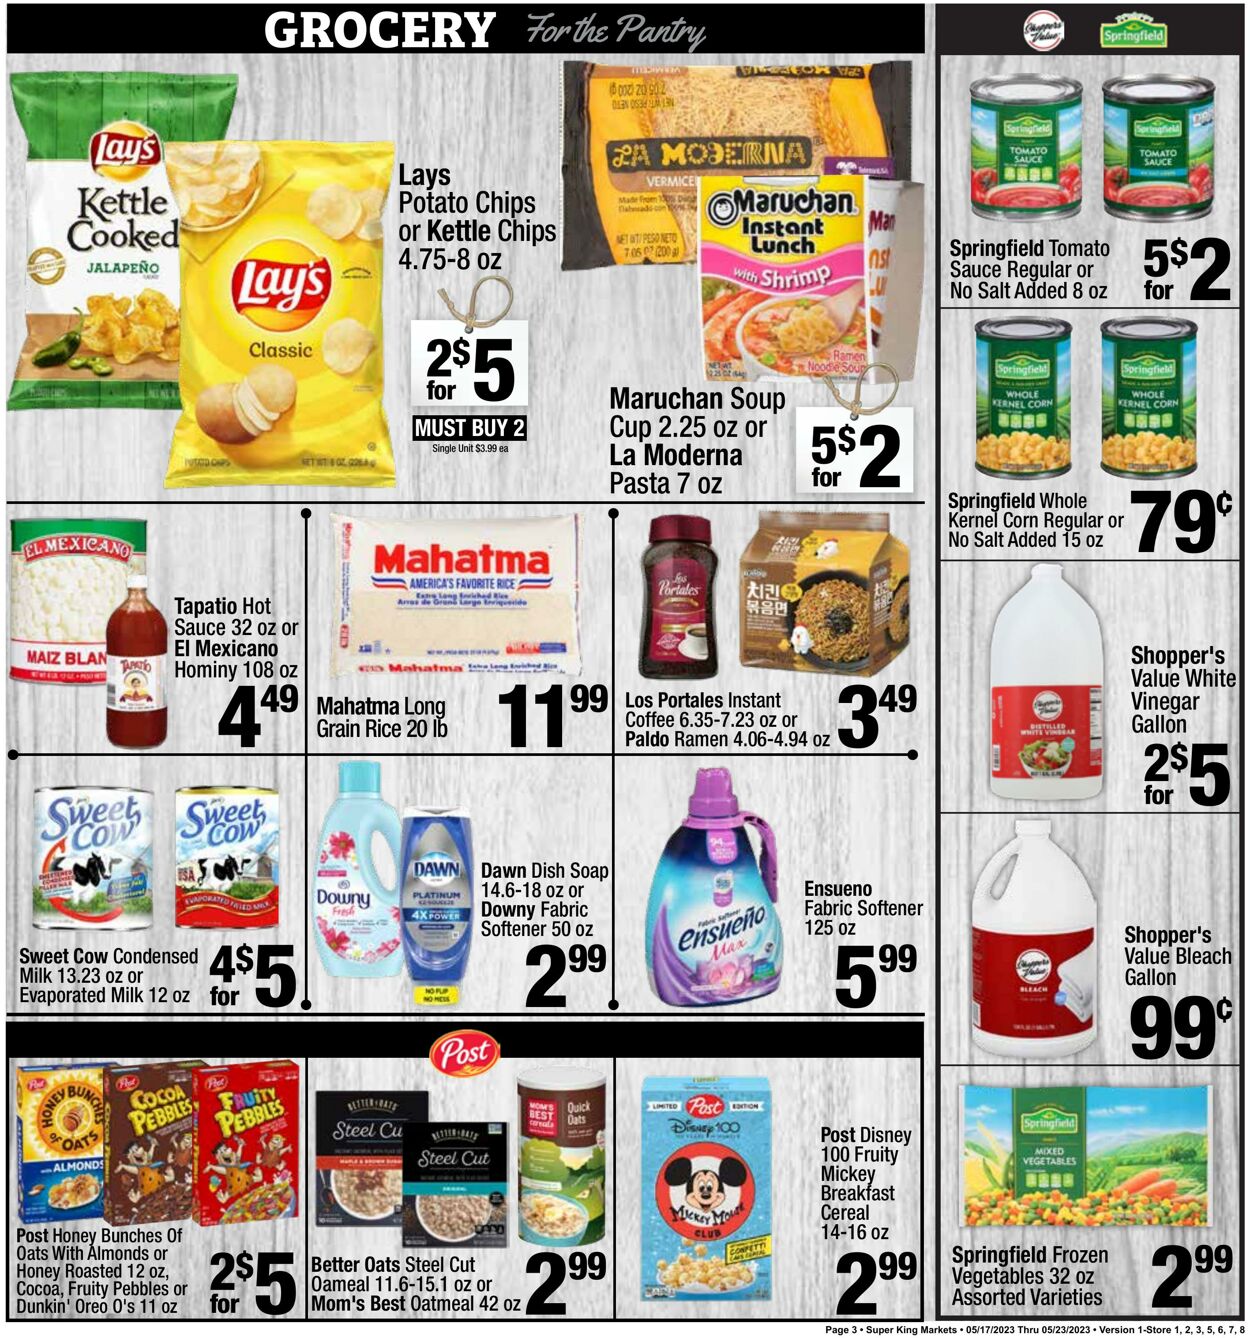 Weekly ad Super King Markets 05/17/2023 - 05/23/2023